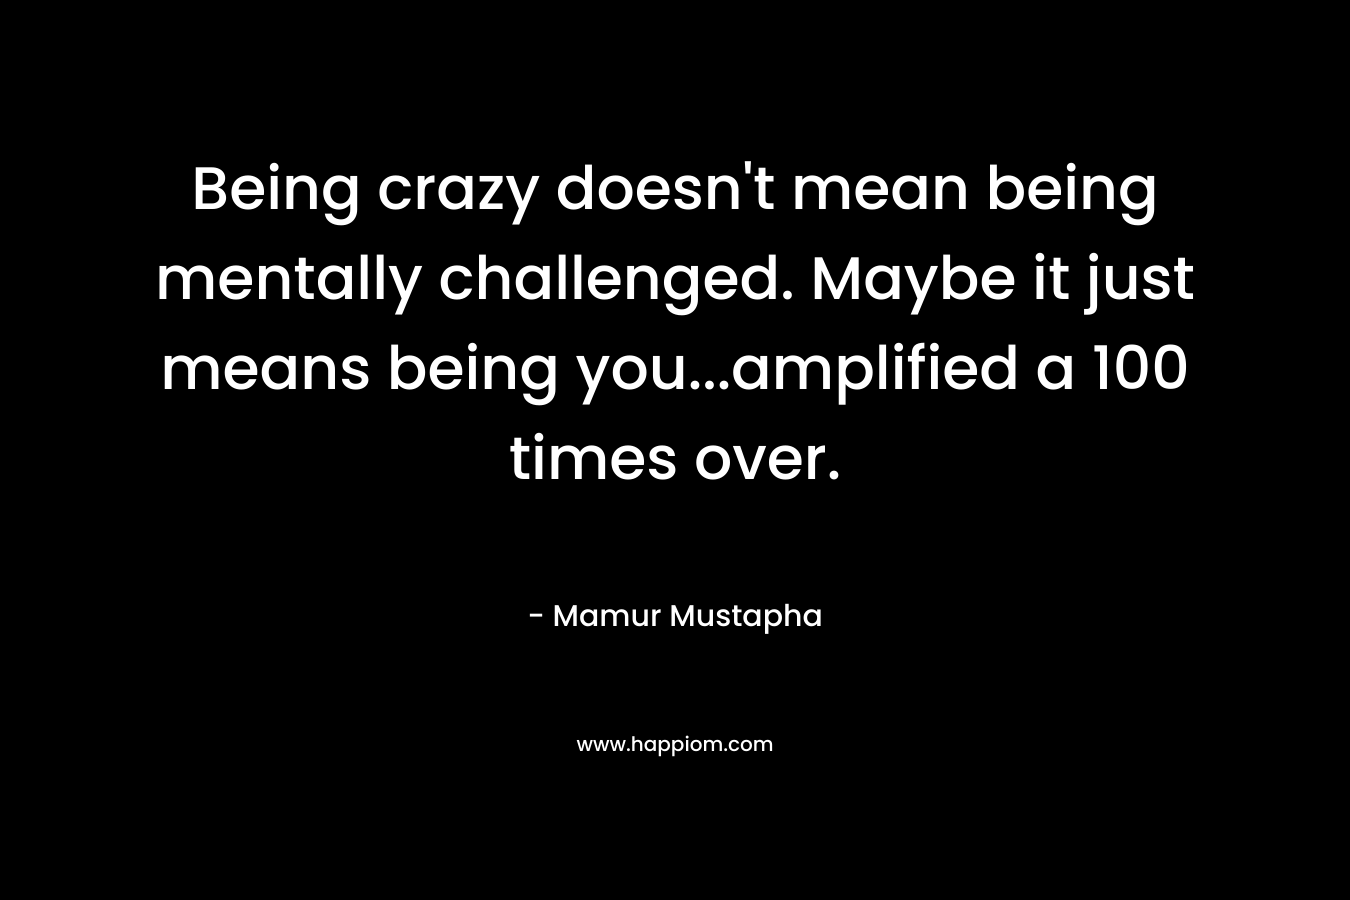 Being crazy doesn't mean being mentally challenged. Maybe it just means being you...amplified a 100 times over.